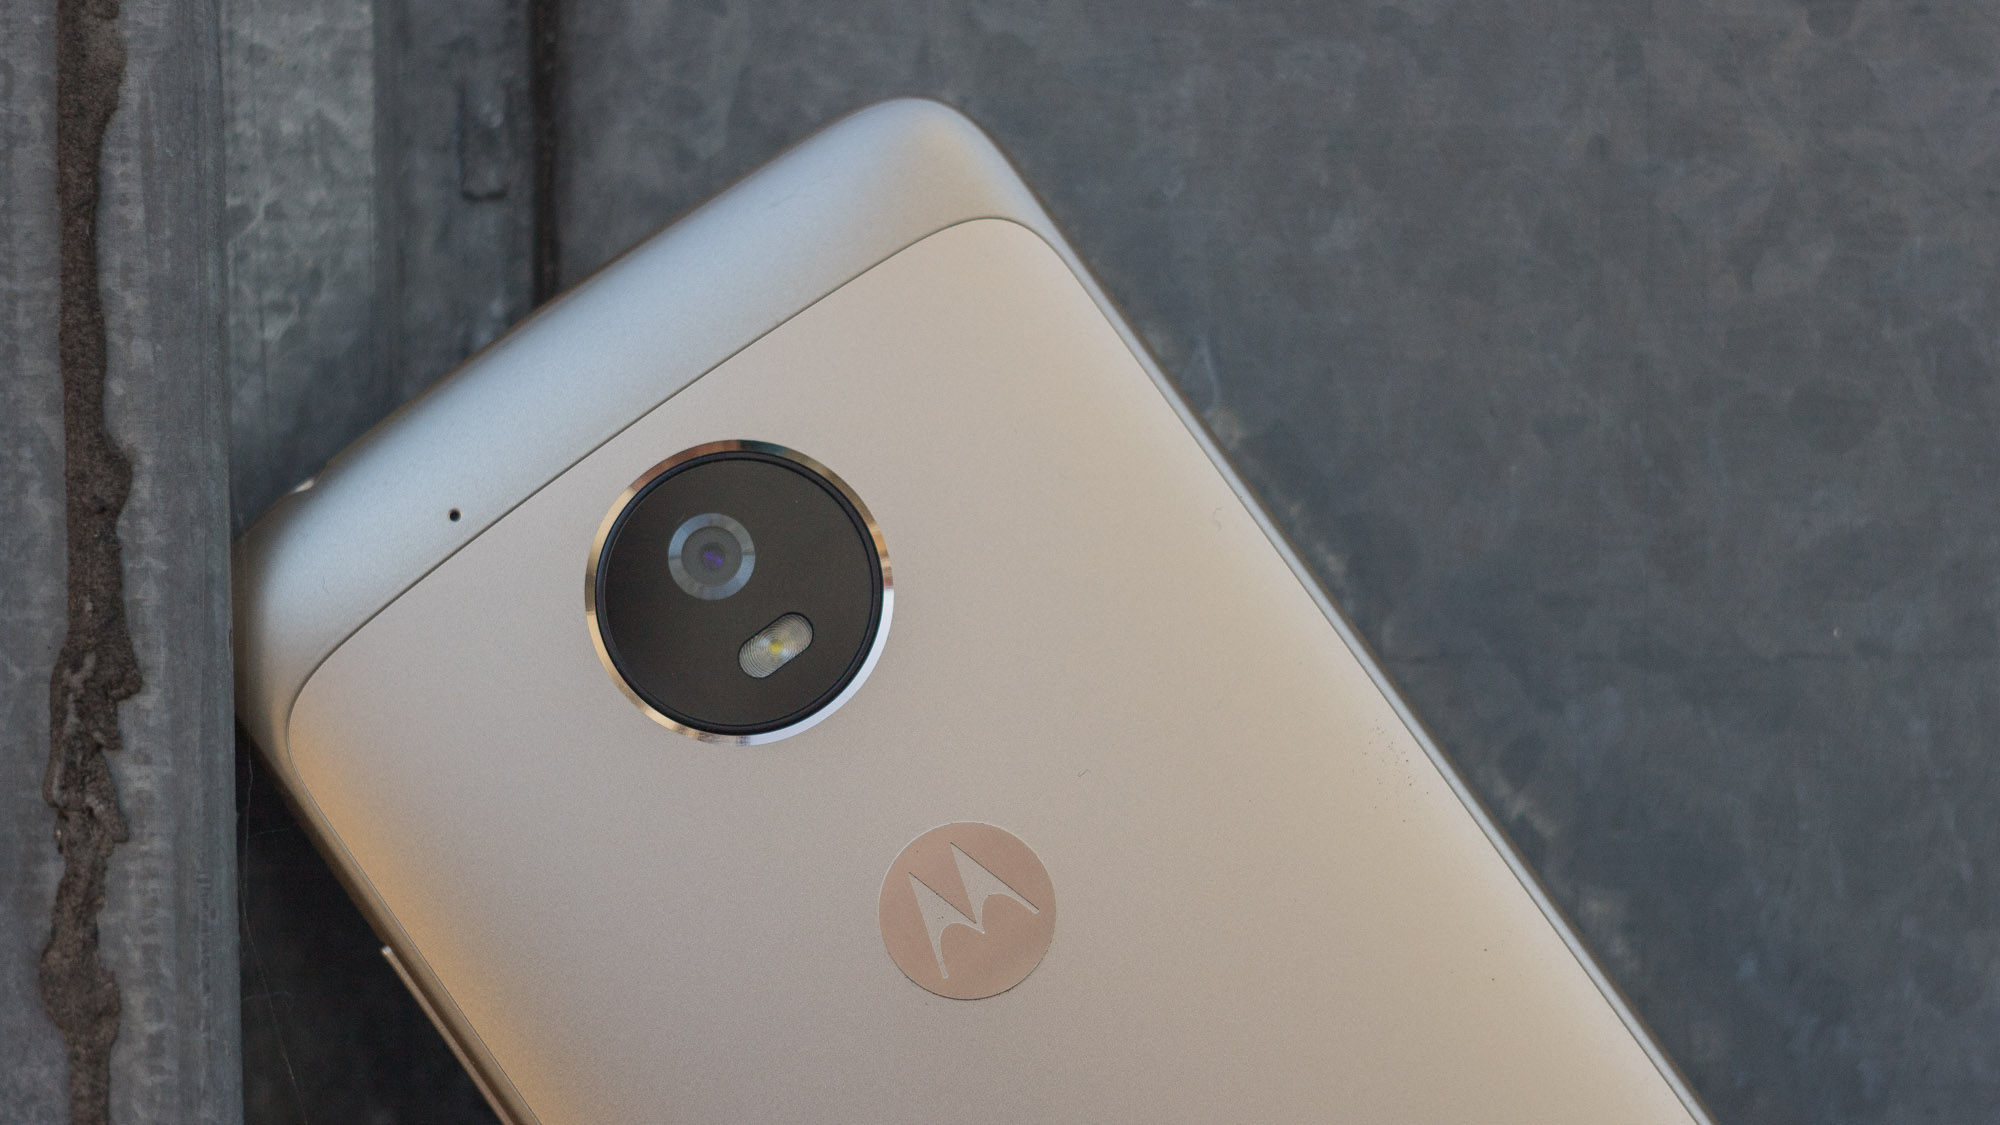 Moto G5 review: The is